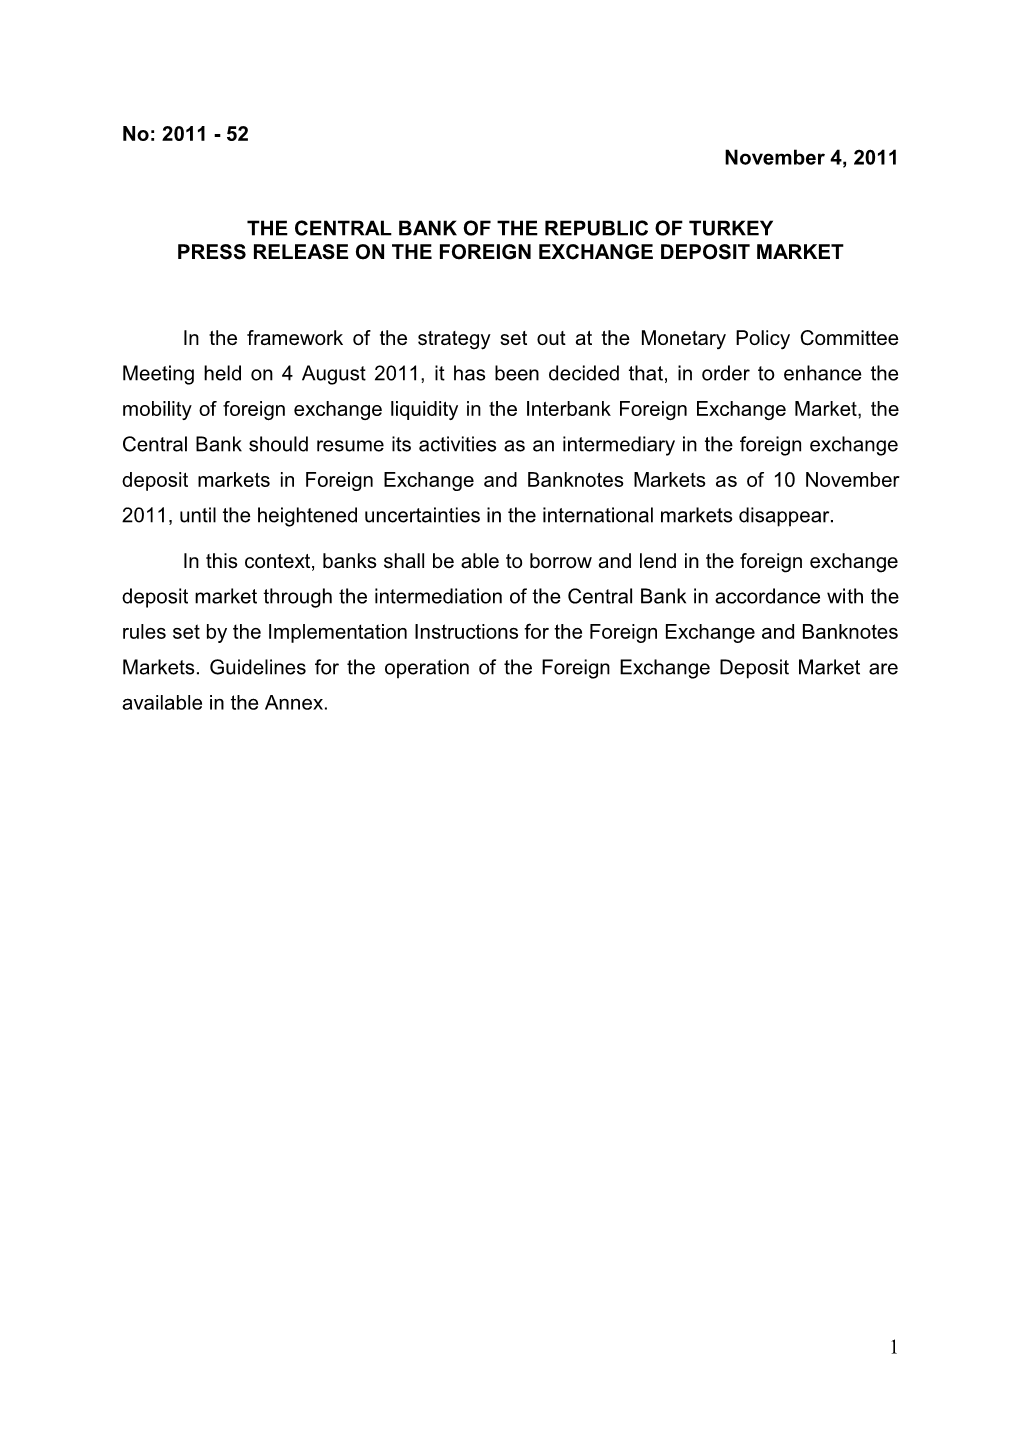 Press Release on the Foreign Exchange Deposit Market